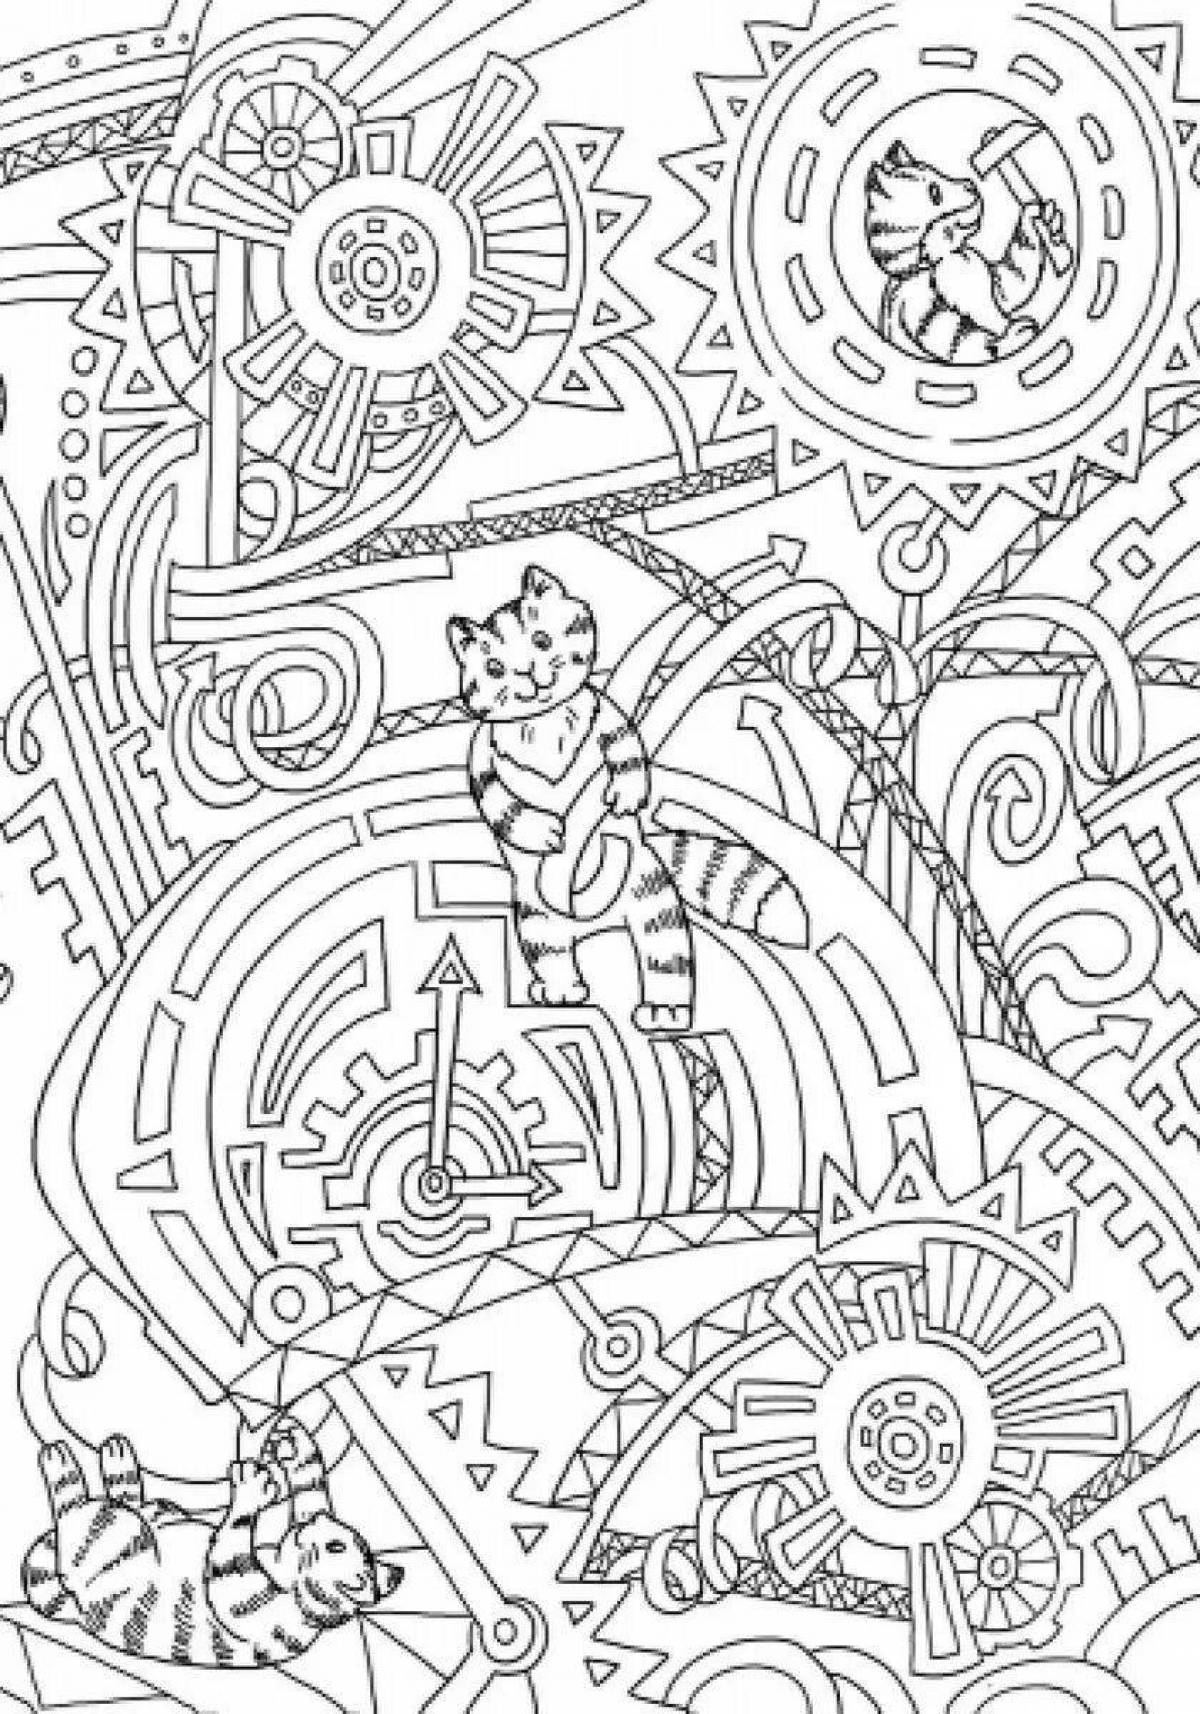 Million cats colorful coloring page